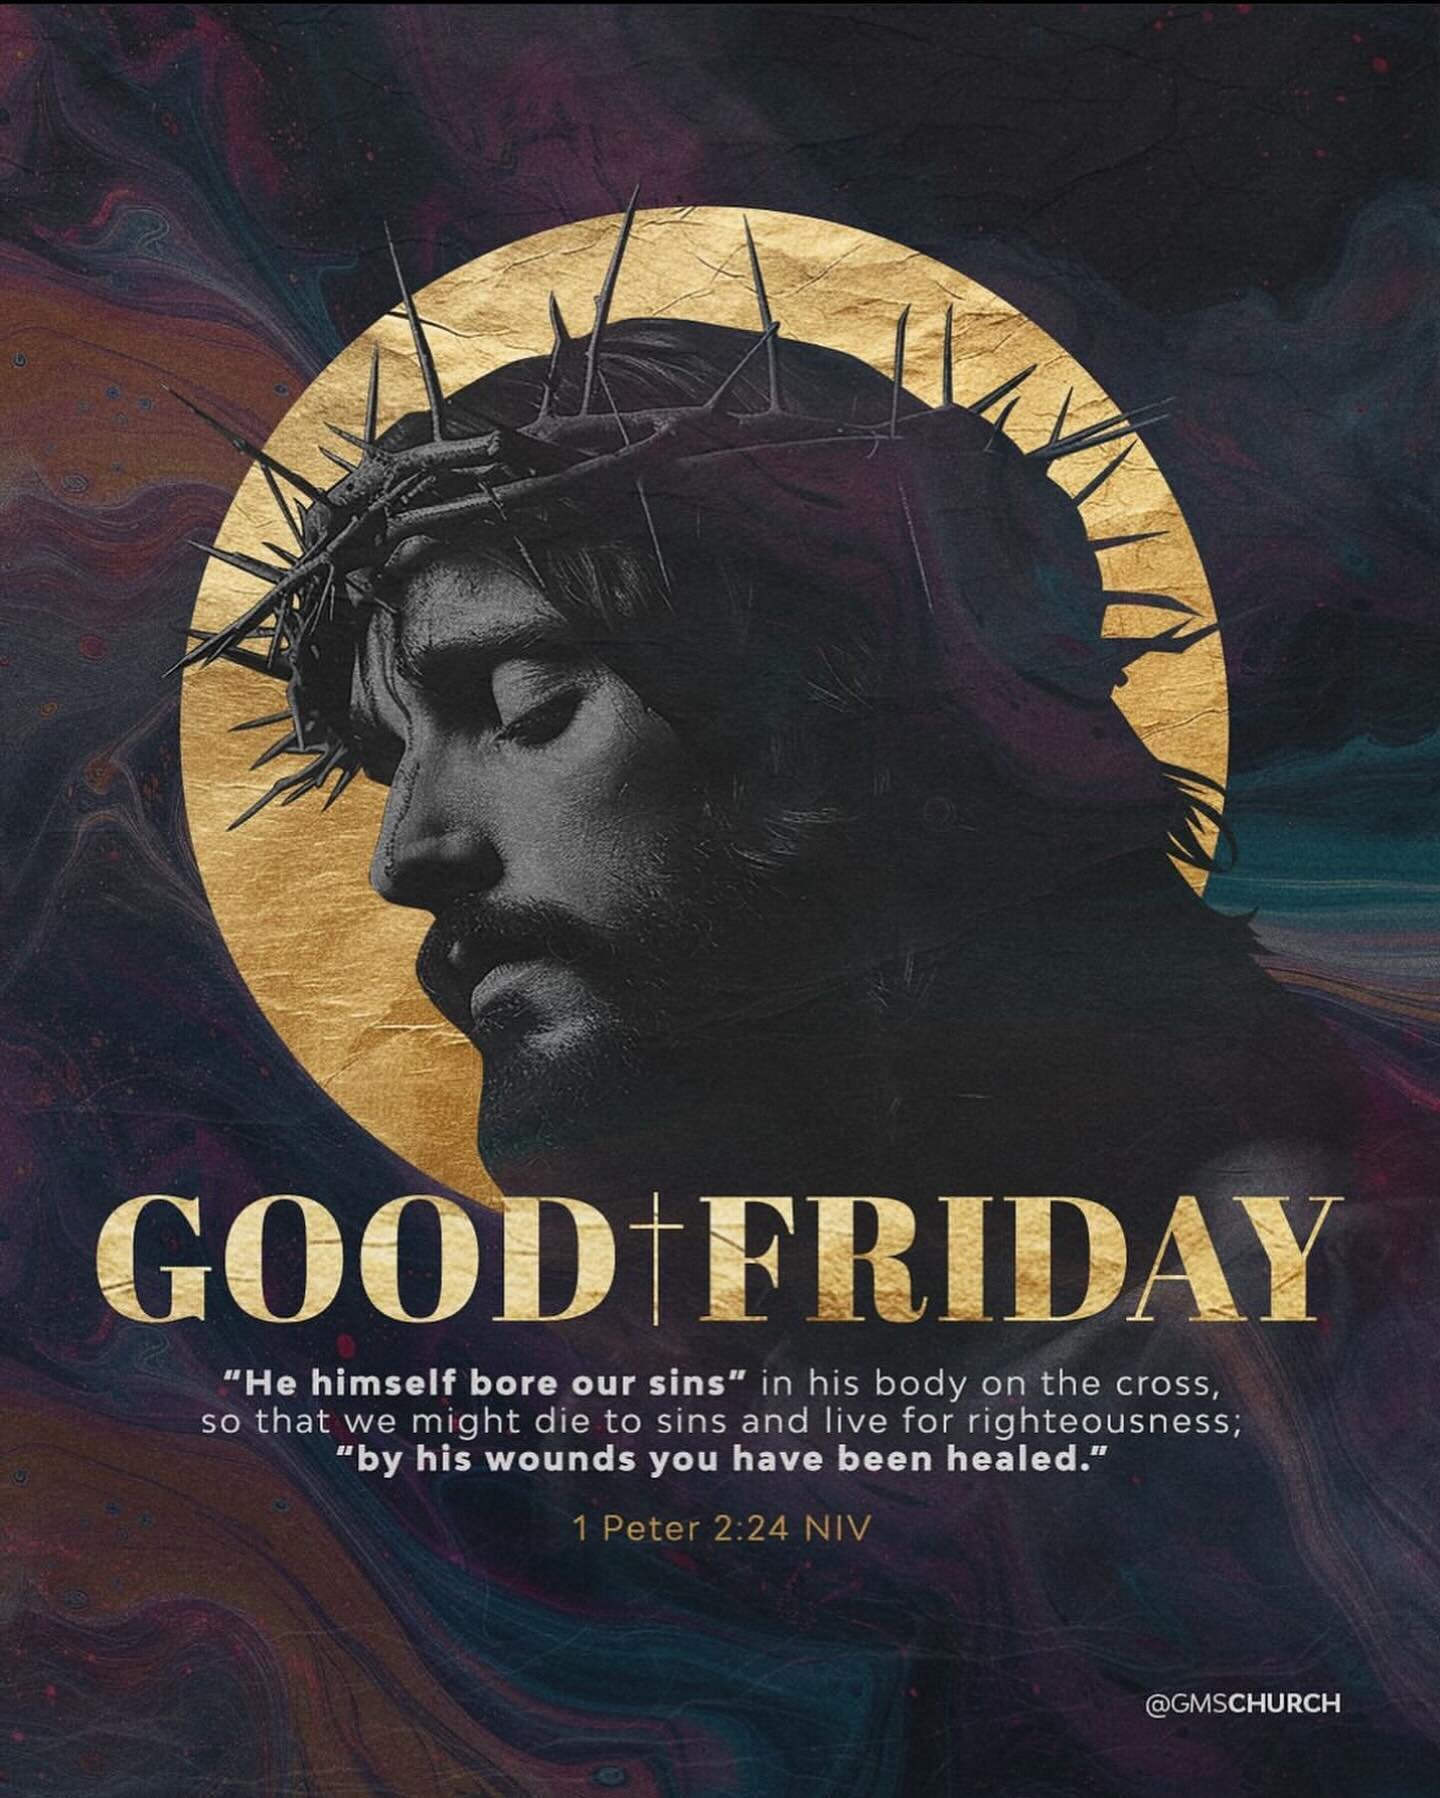 Join us this evening at 7:00PM for a Service of Darkness as we remember the ultimate sacrifice Jesus made for us on the cross on Good Friday.